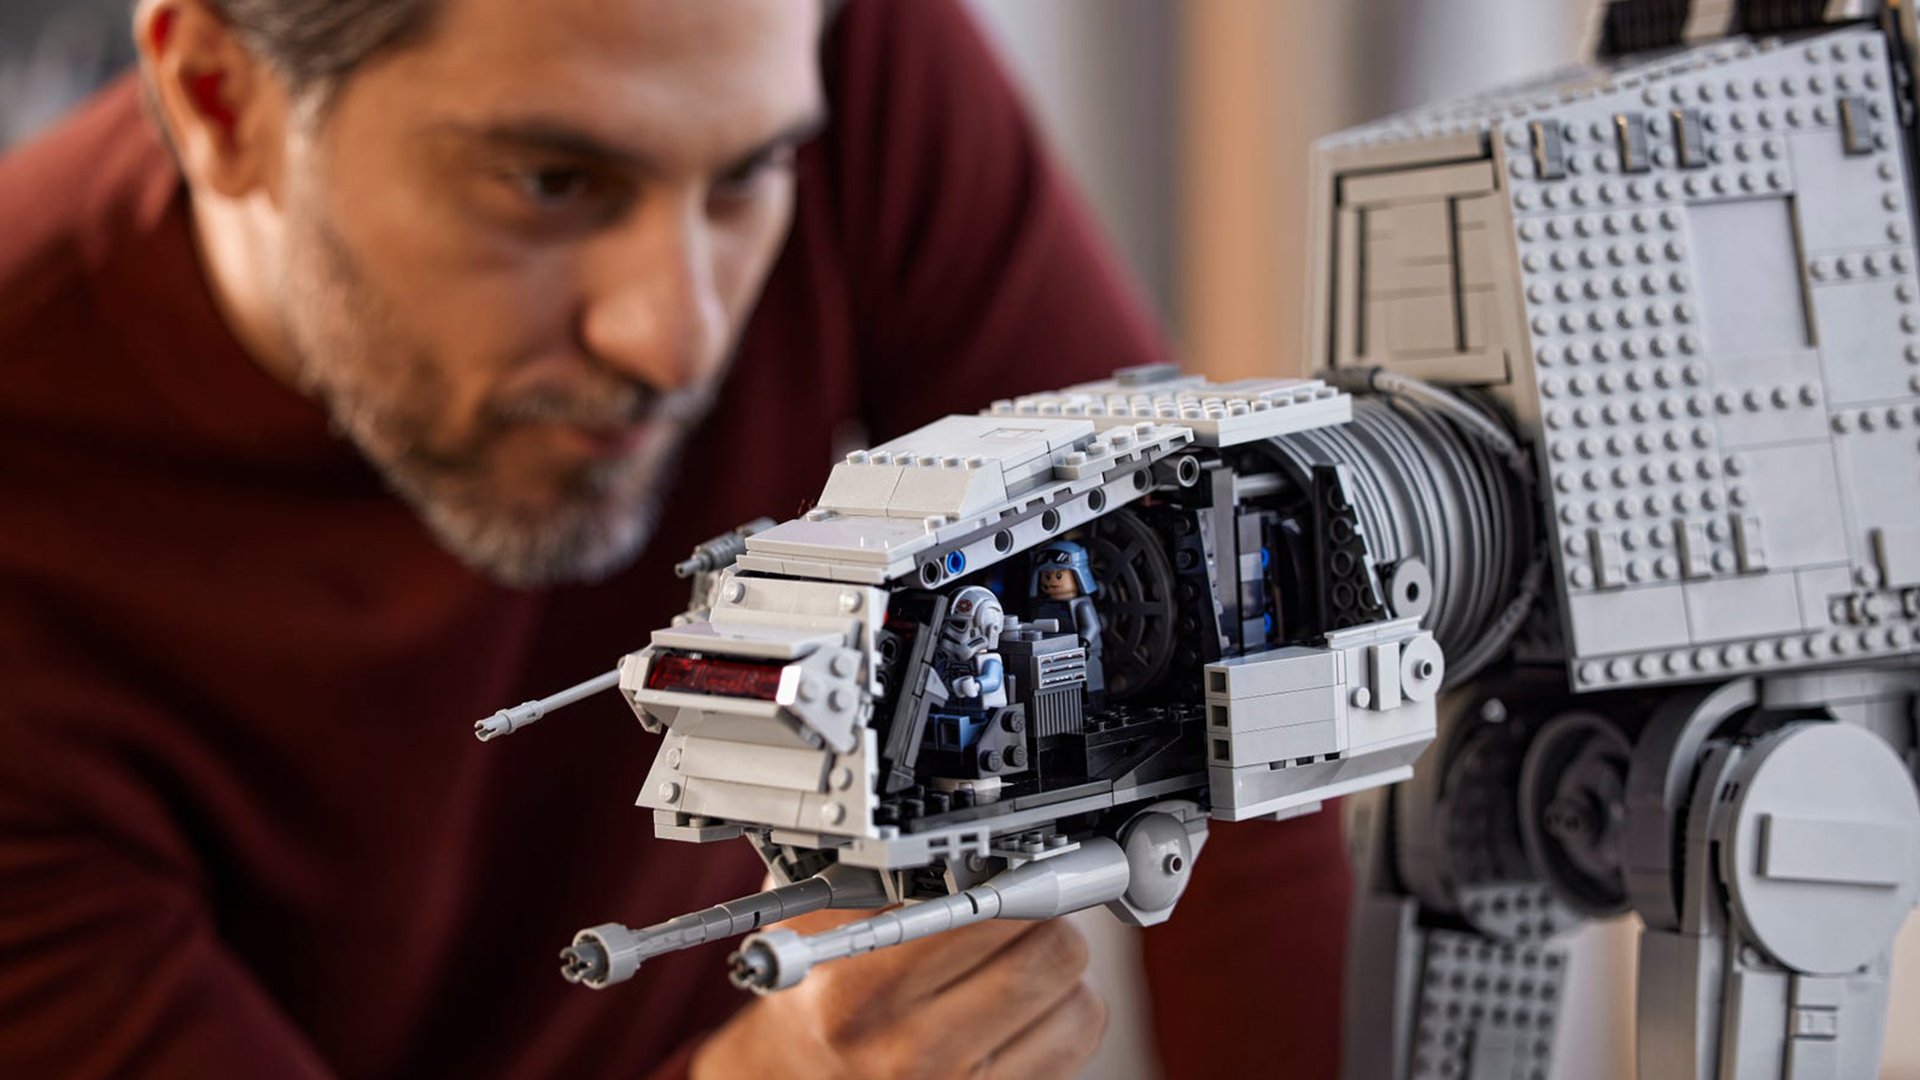 Man holding the head of the AT-ST Lego Star Wars